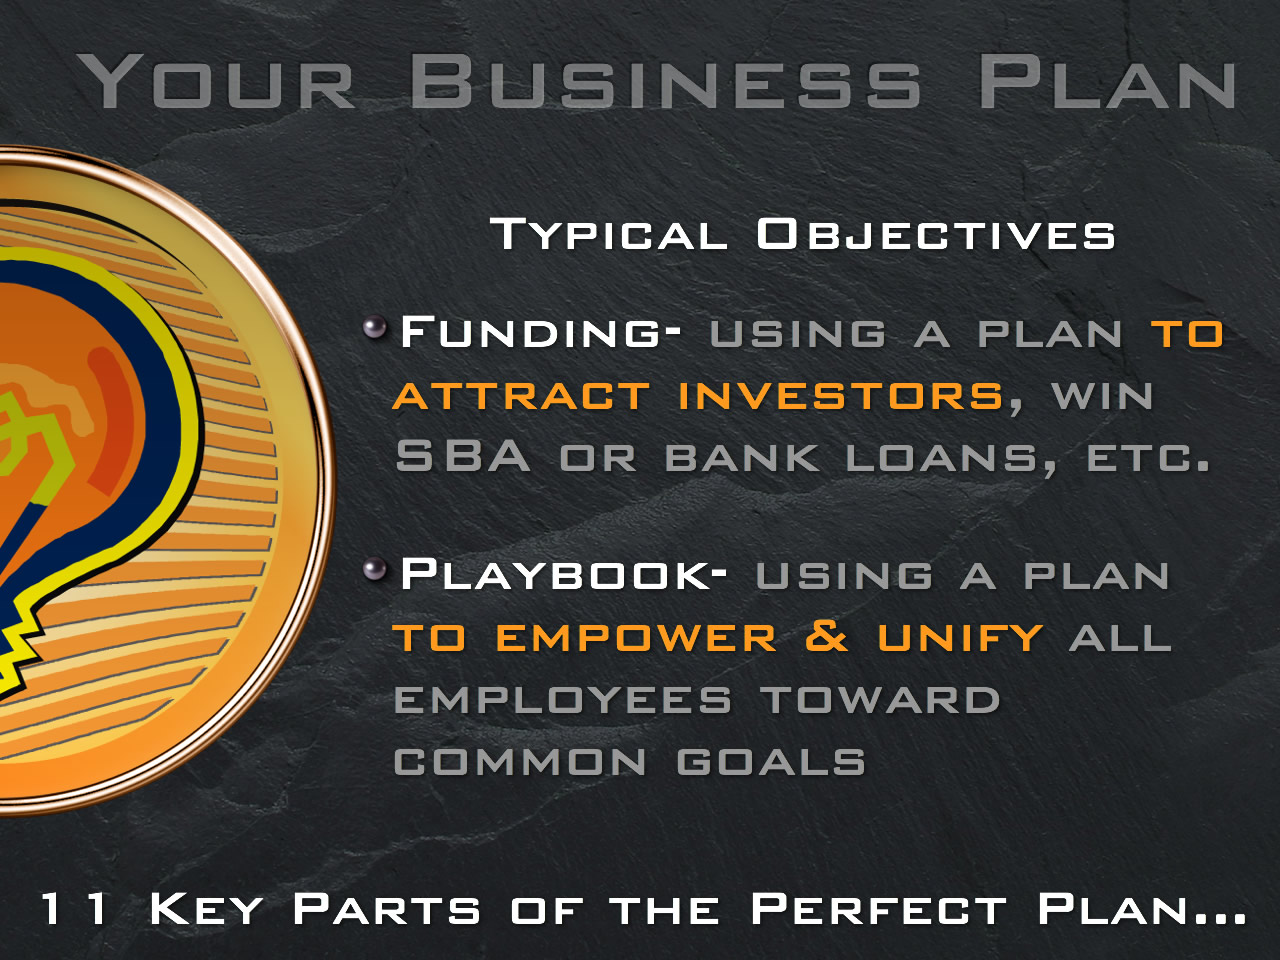 Business plan objectives: raise money and company playbook to mobilize your human resources